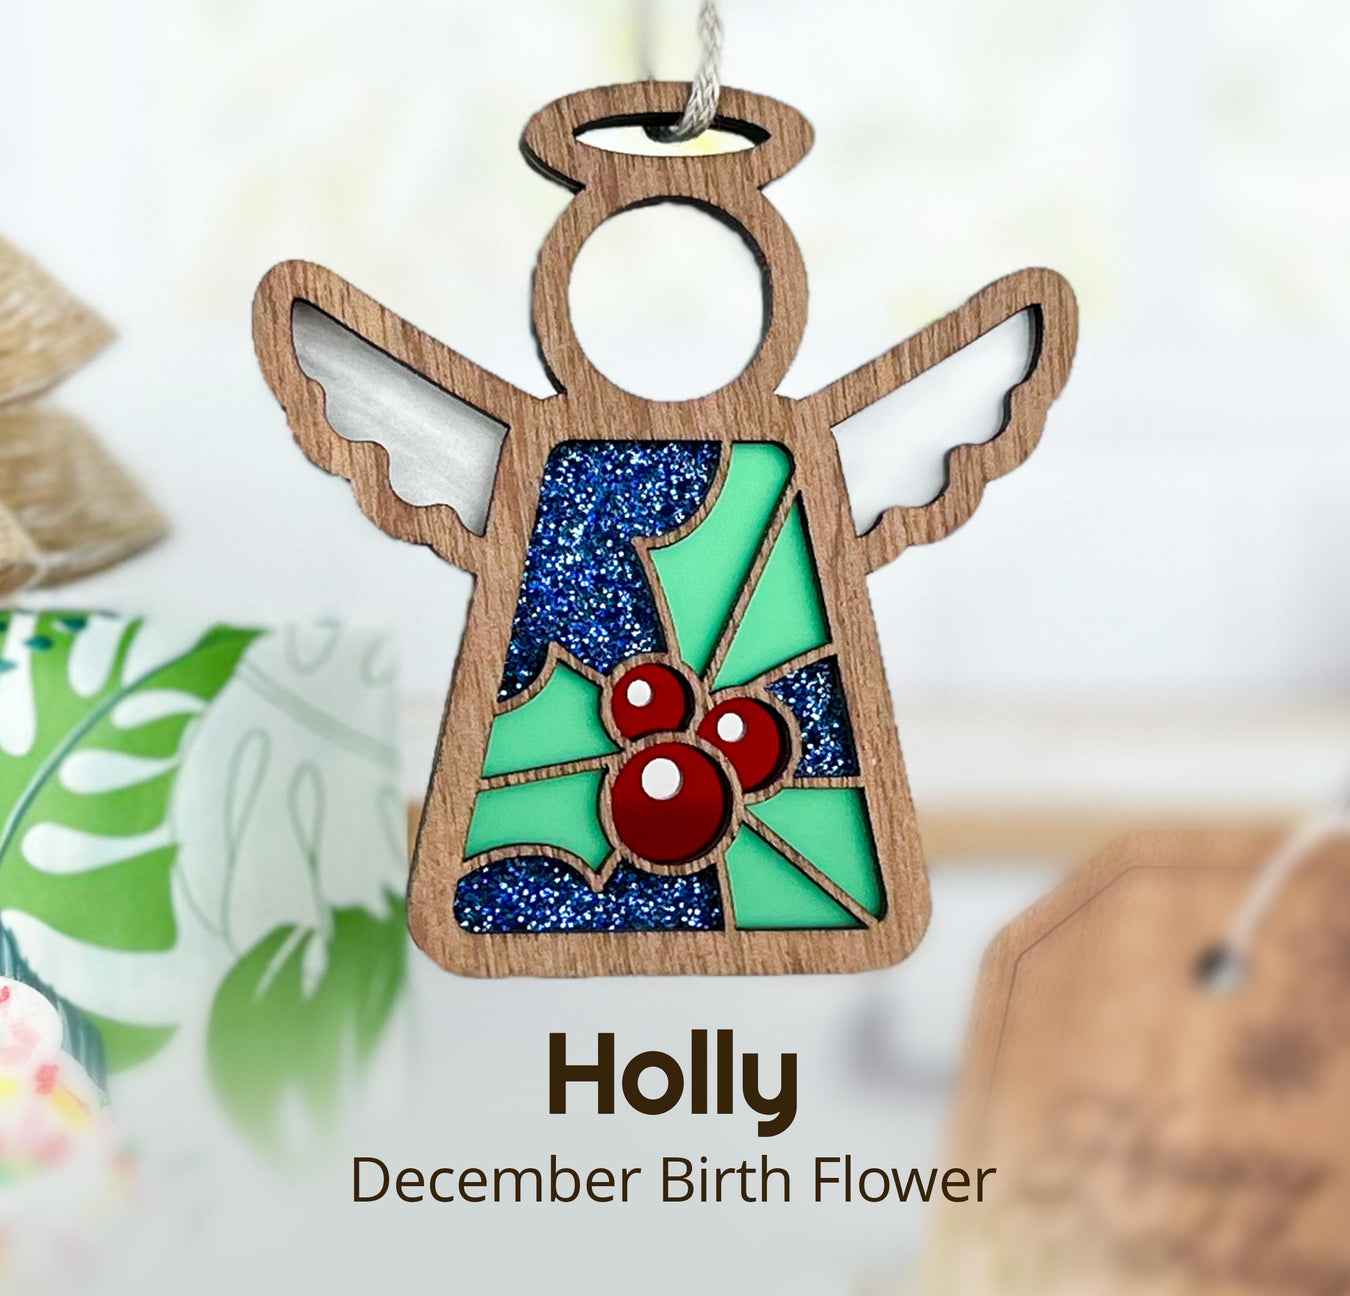 Holly. One of two birth month flowers for December.